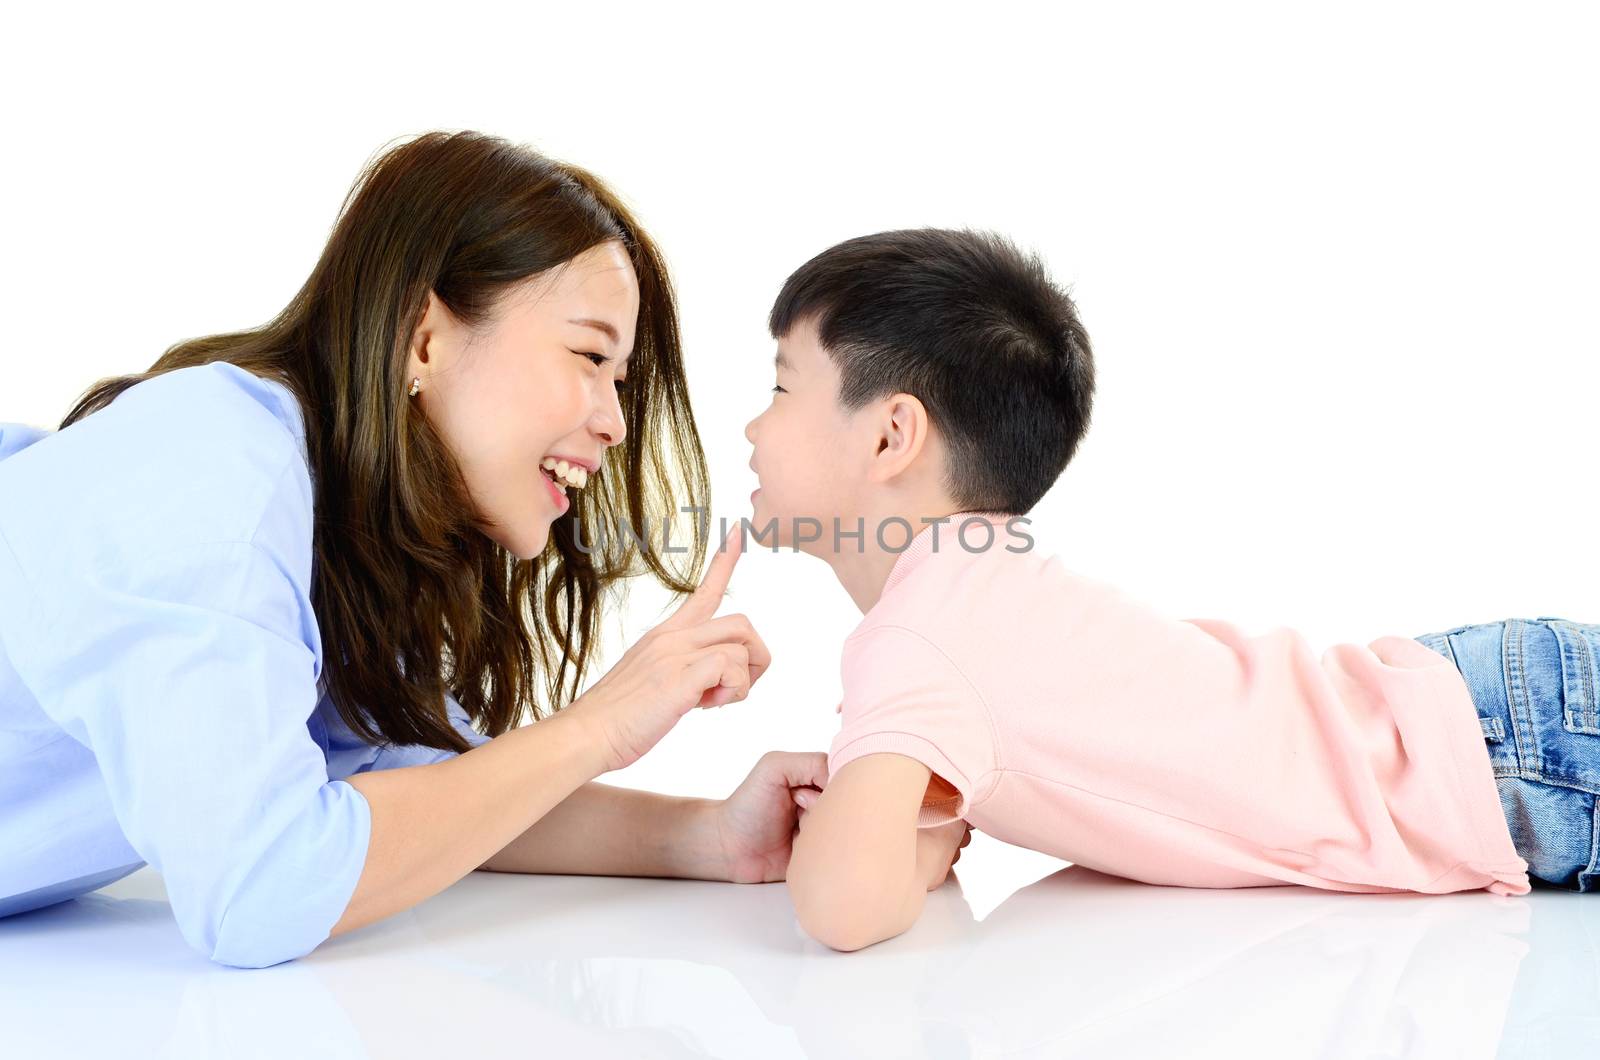 Asian mother and her son indoor portrait